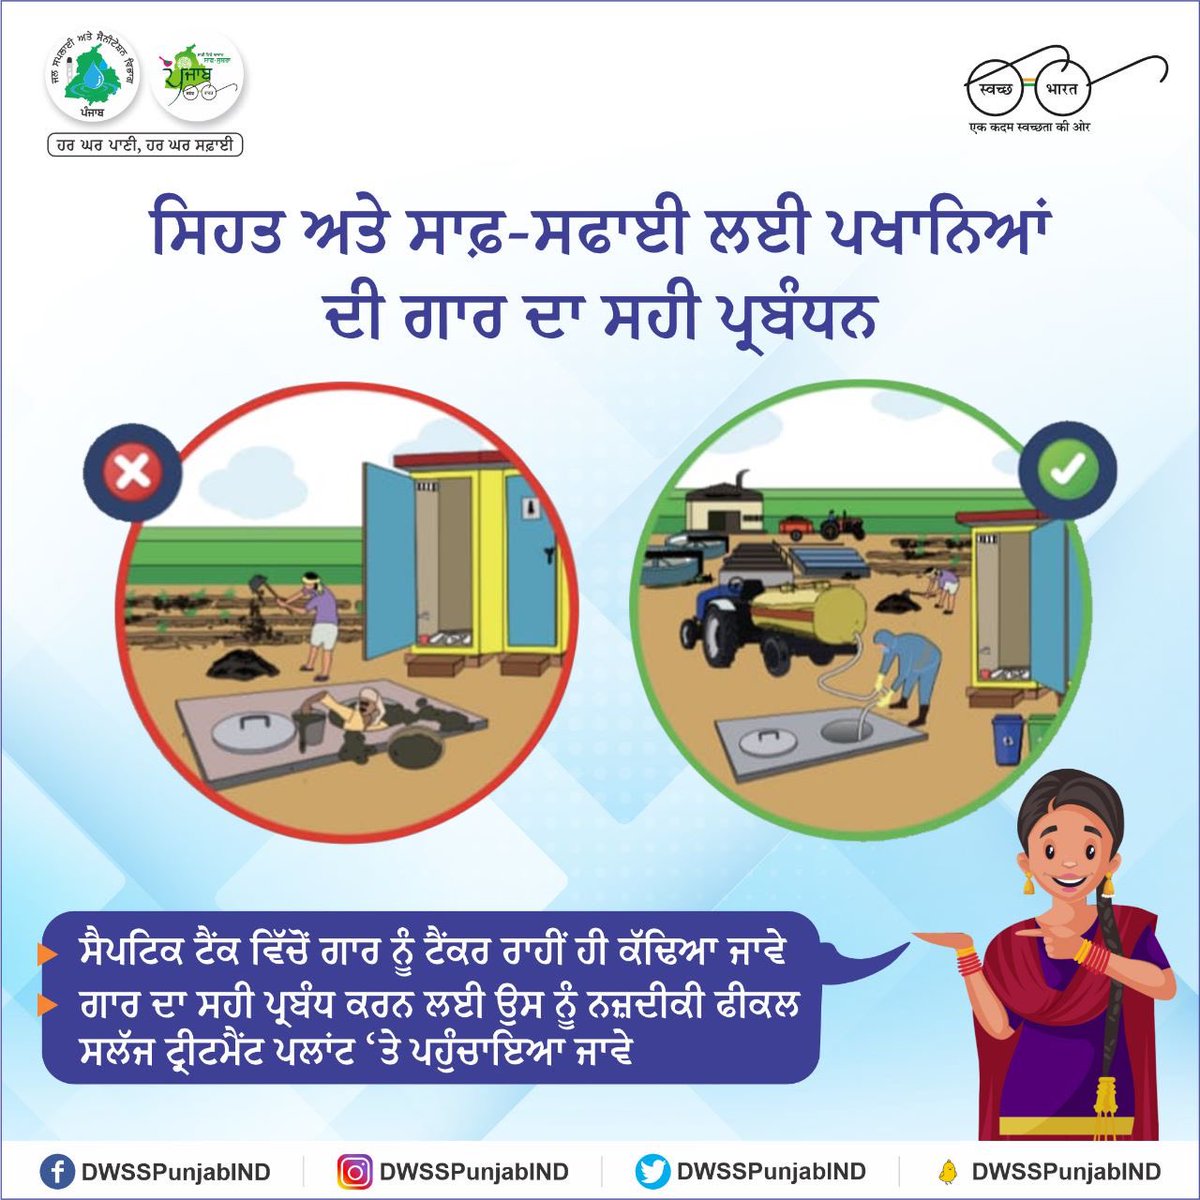 De-sludging of septic tanks must be done through authorised septic tank cleaning tankers only. The emptied sludge must be brought to a faecal sludge treatment plant for proper treatment of the septage. 

#ODFPlus #SwachhBharat #faecalsludgemanagement #SanitationForAll